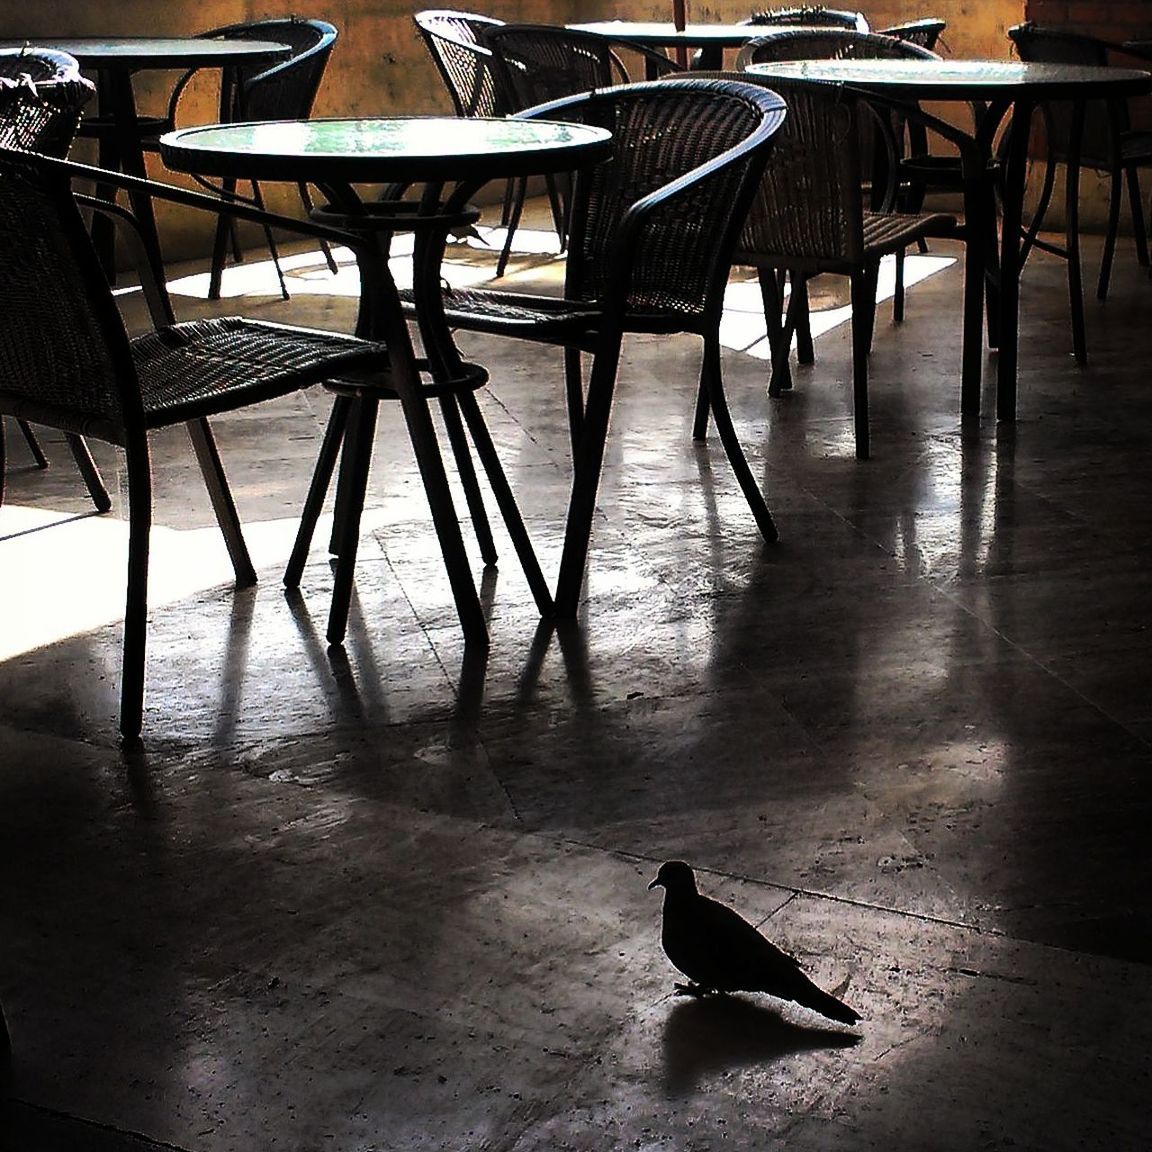 Pigeon sit on floor at cafe